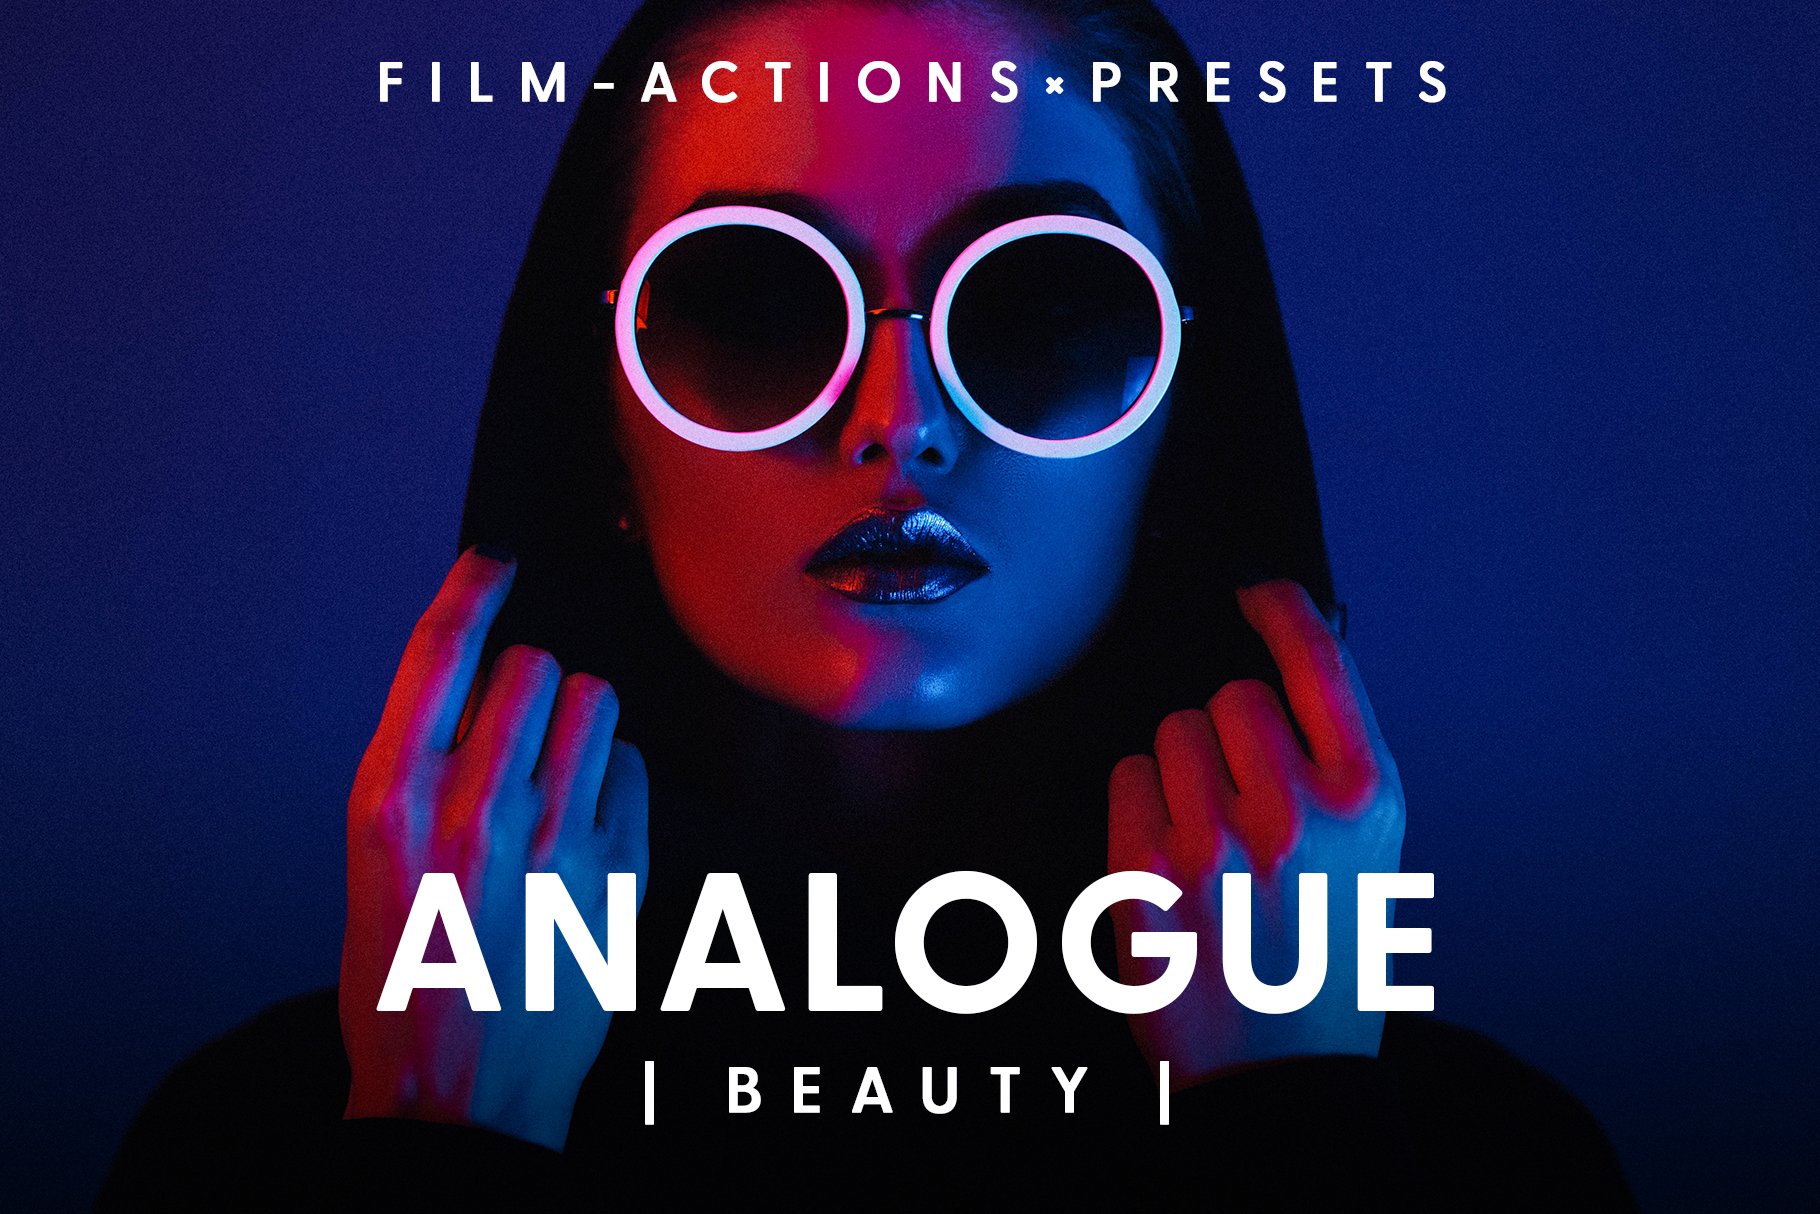 Analogue Beauty - Actions & Presetscover image.